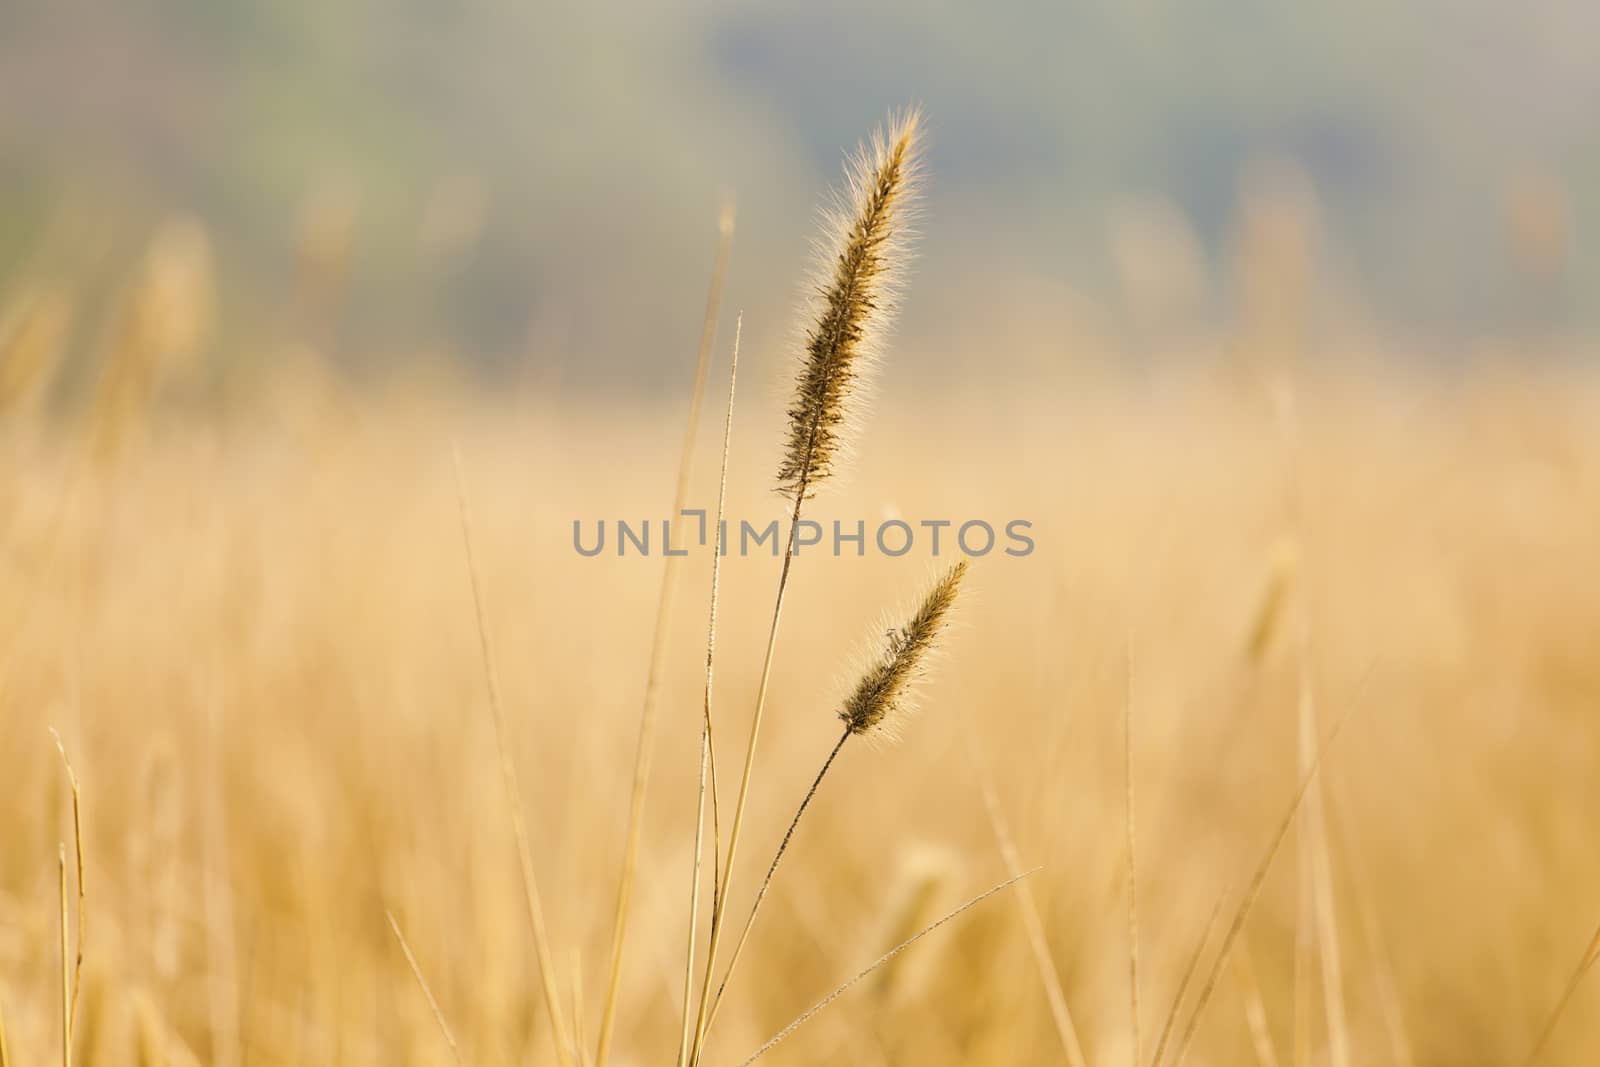 Wheat field background by kawing921